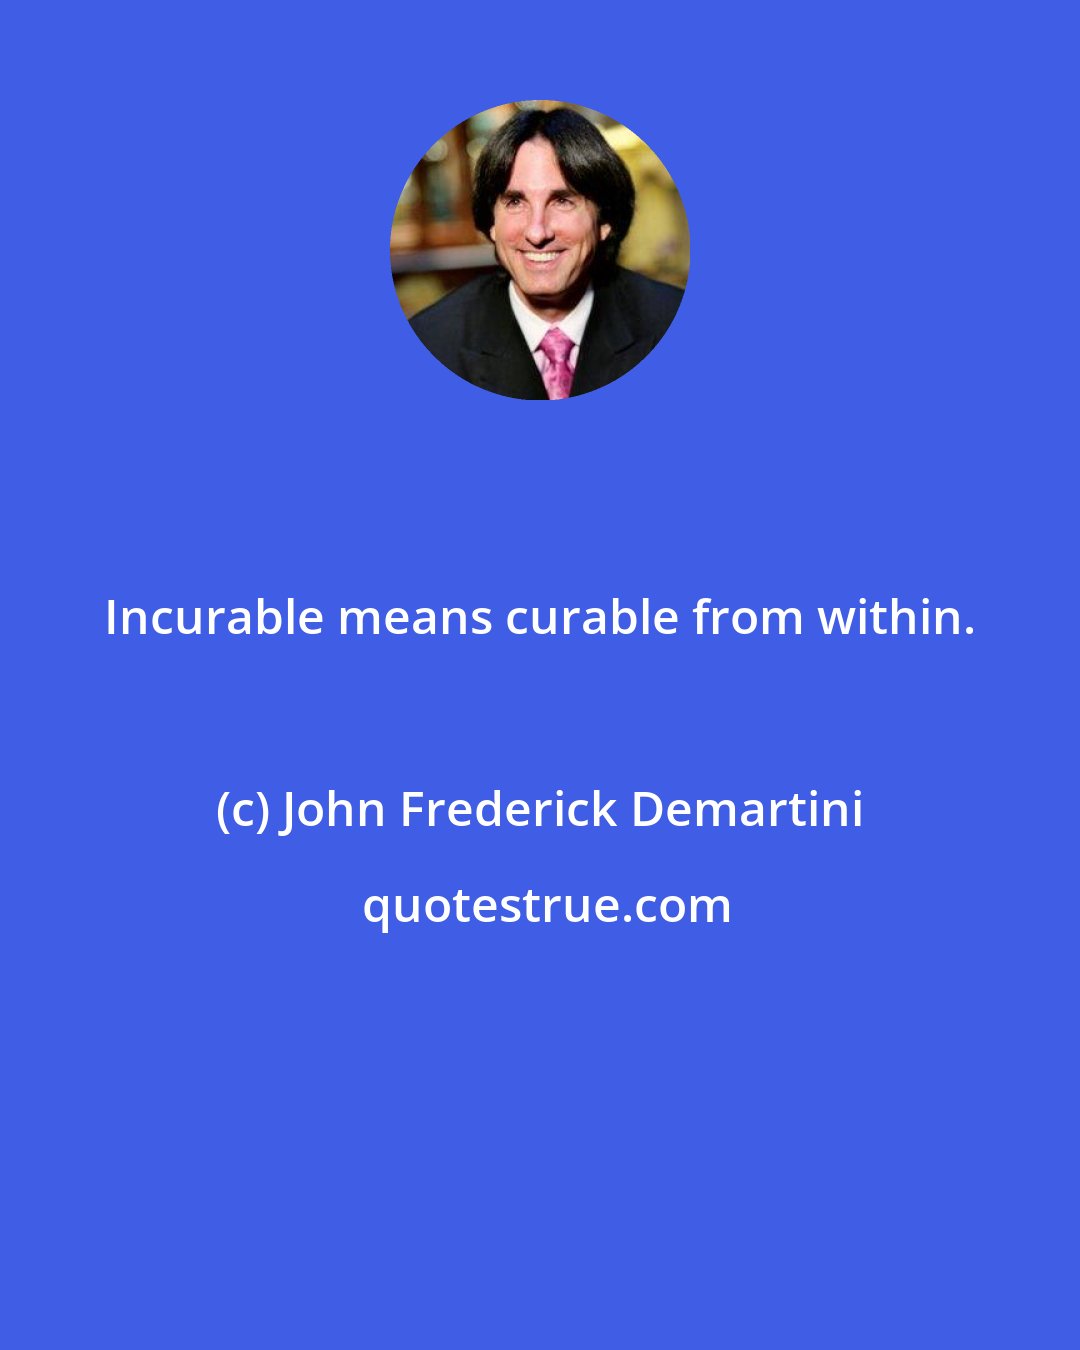 John Frederick Demartini: Incurable means curable from within.